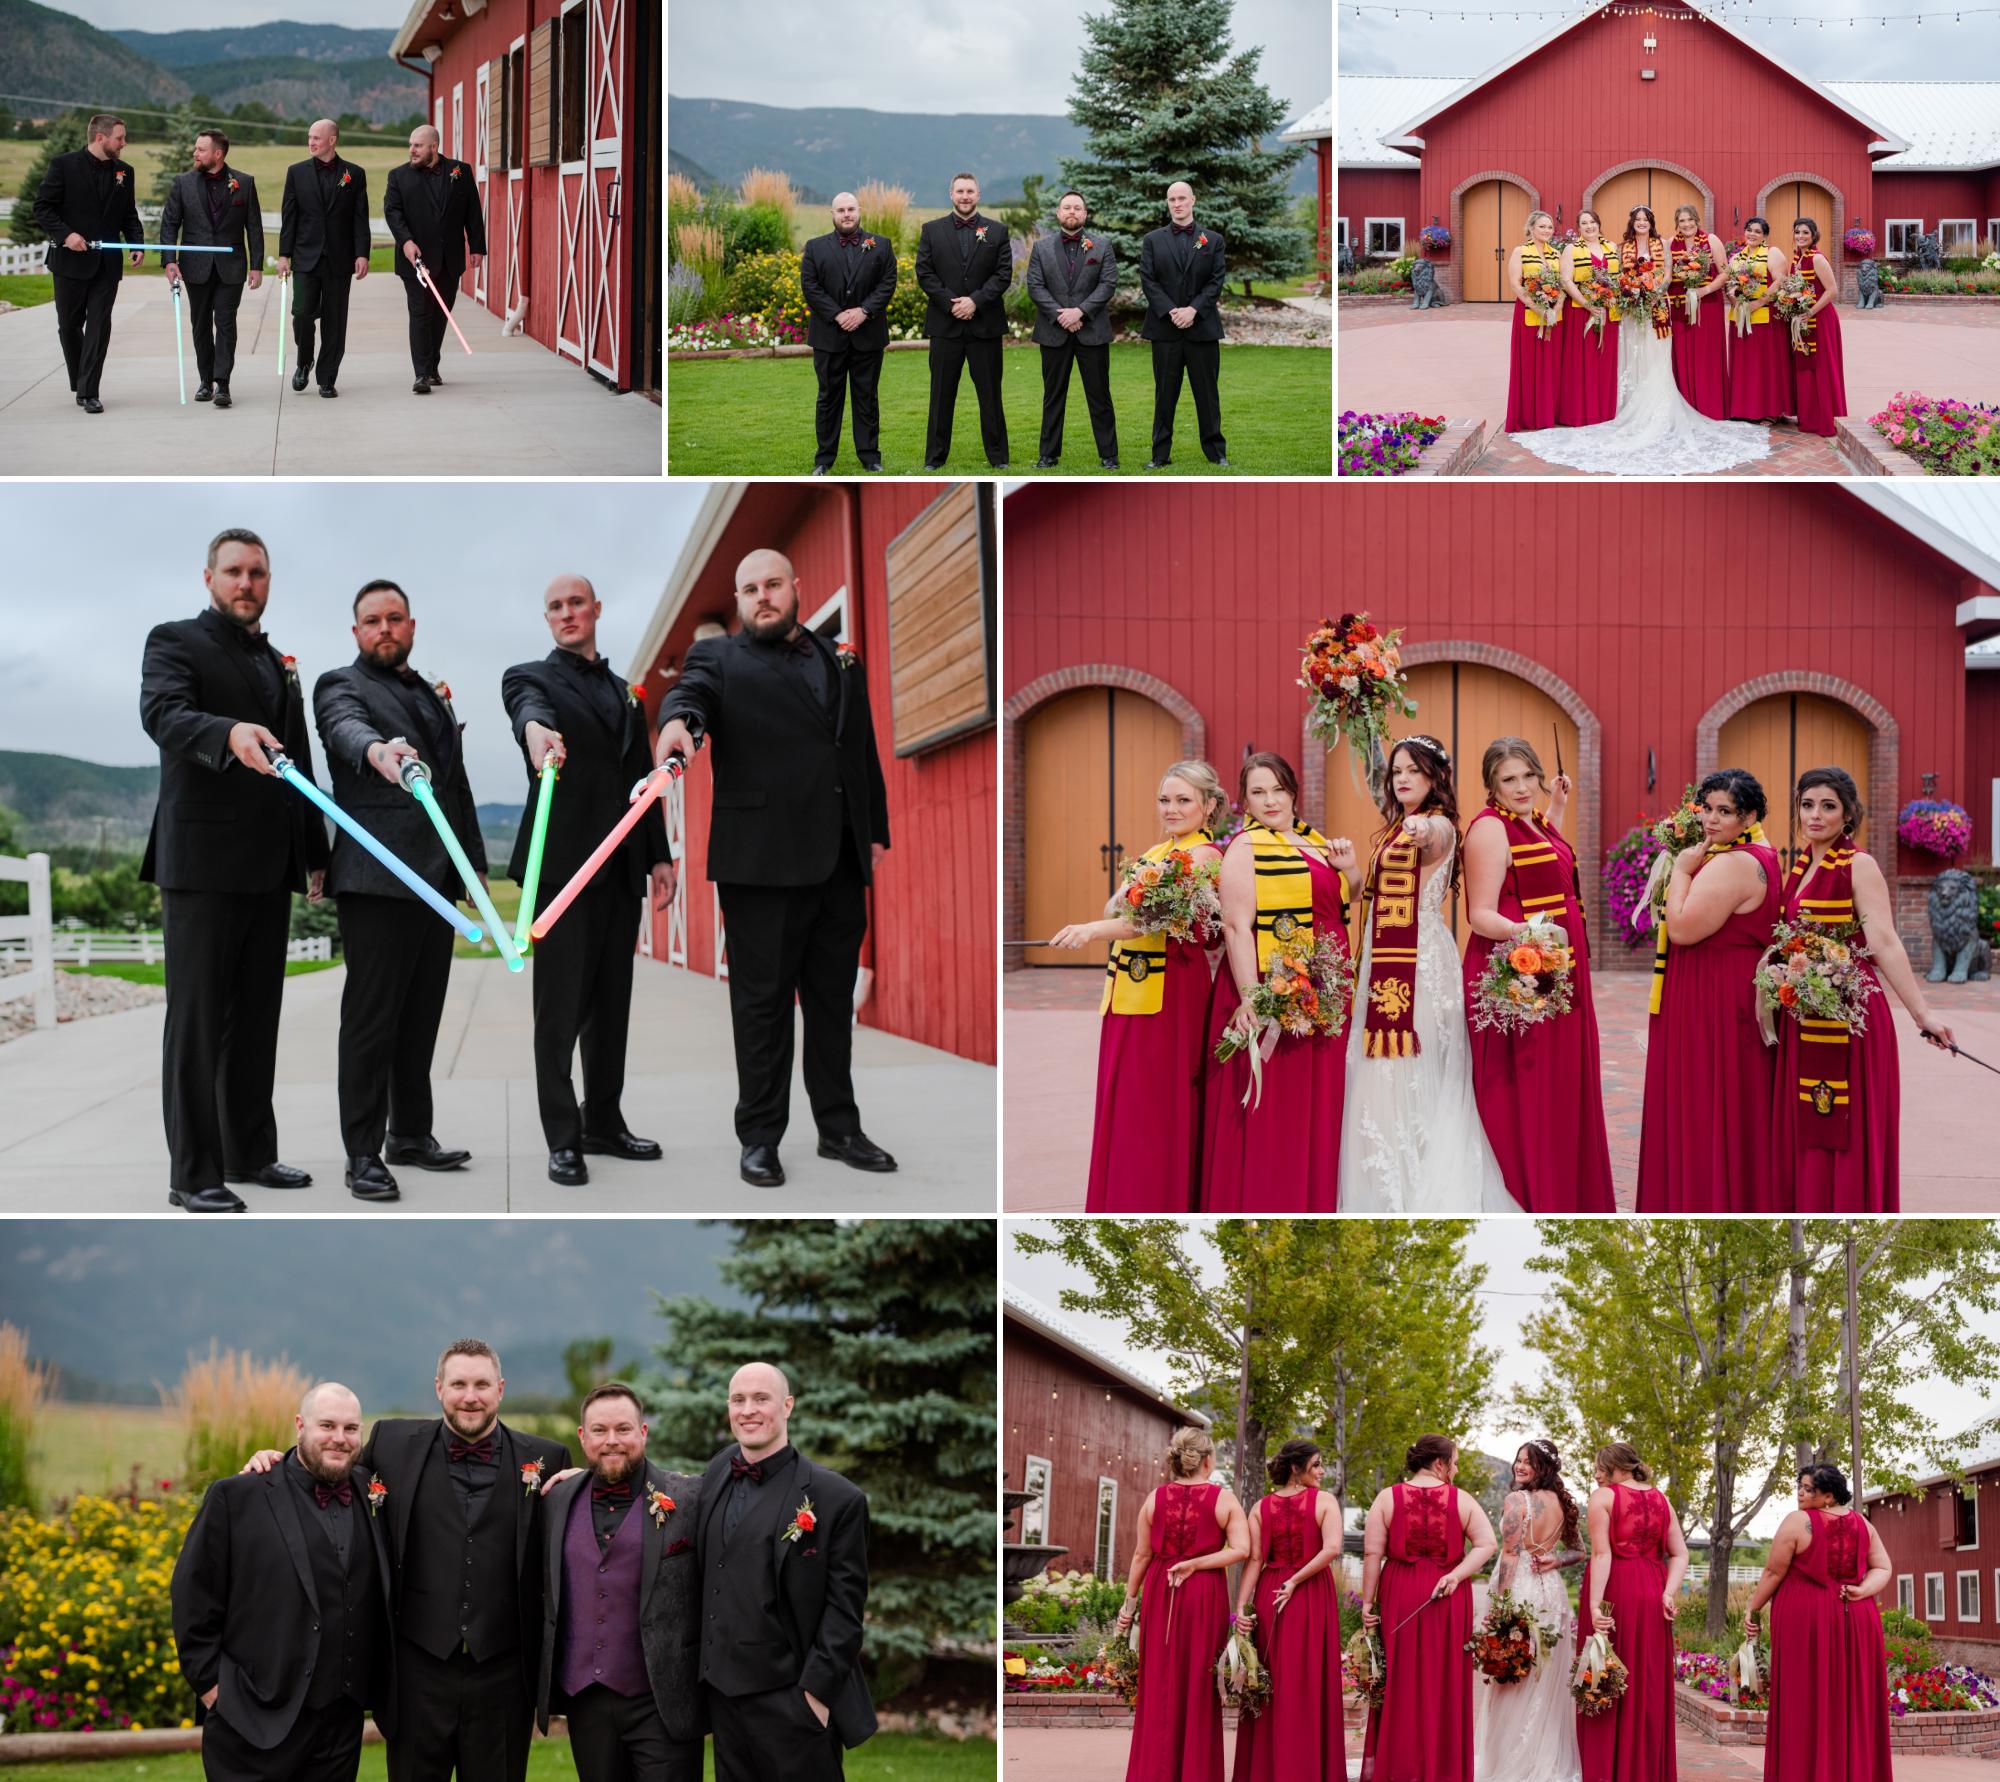 Star Wars Harry Potter wedding party